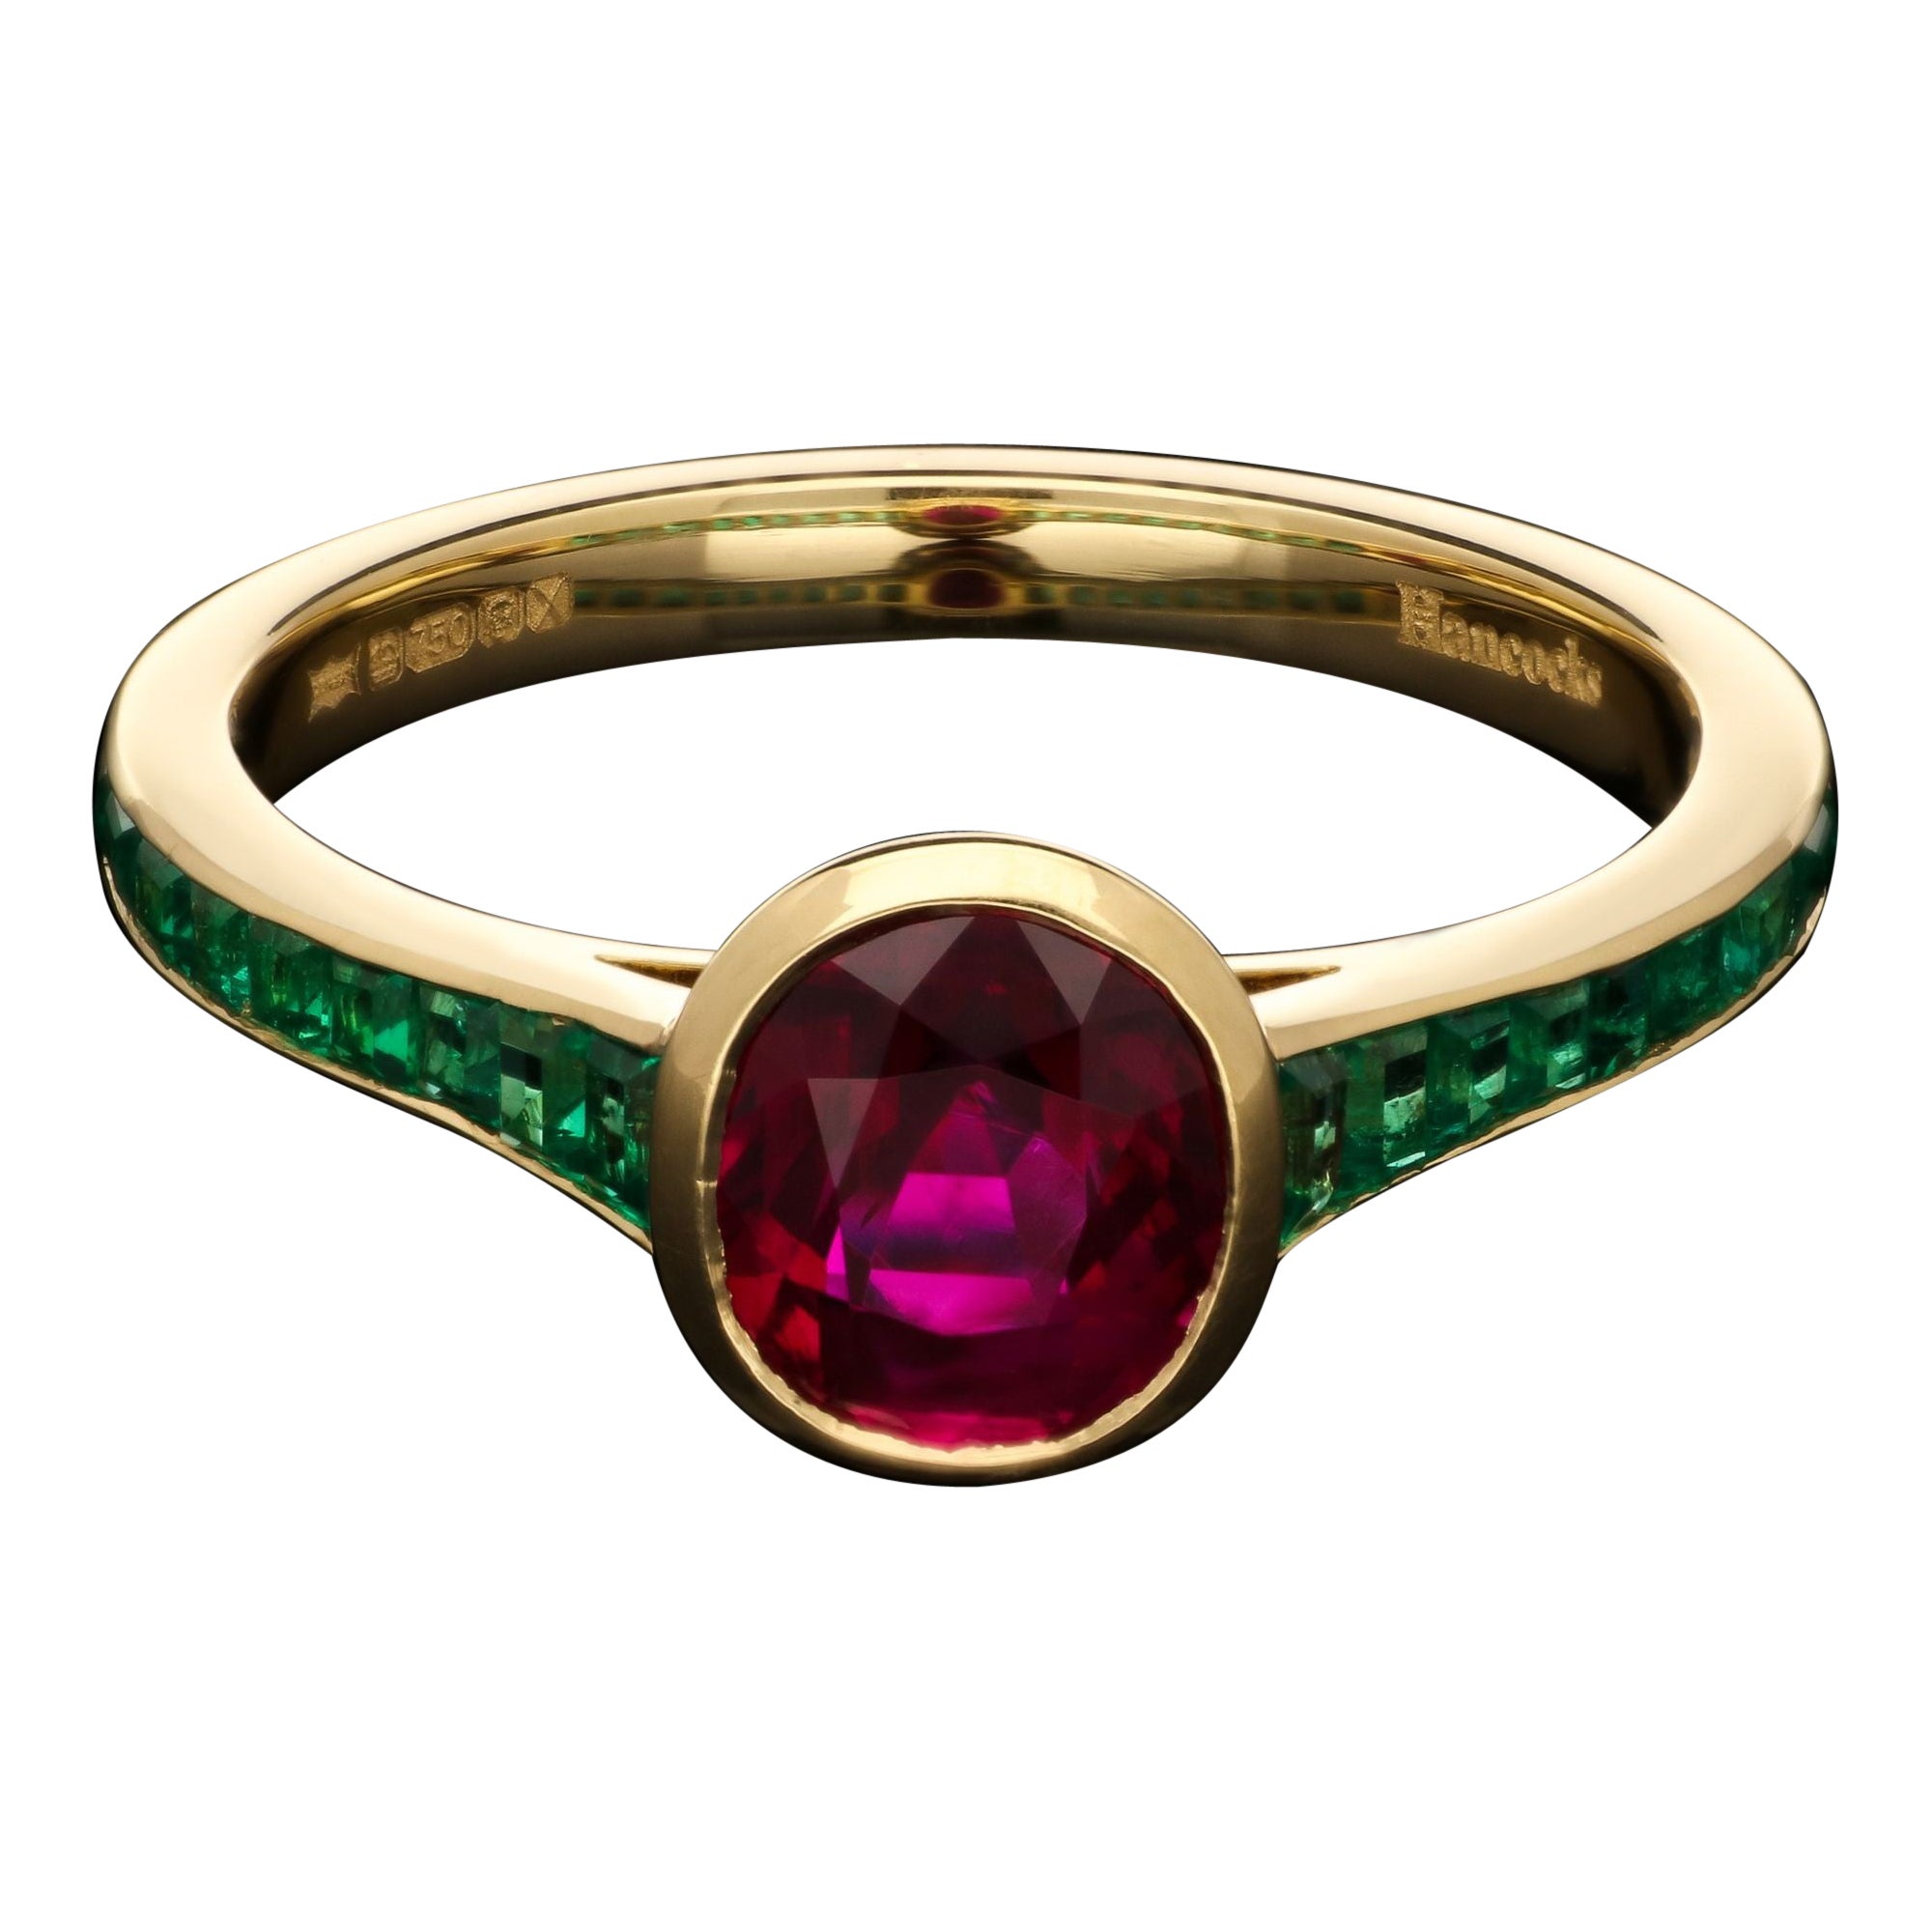 Hancocks 1.58ct Burmese Ruby And Emerald Ring In 18ct Yellow Gold Contemporary